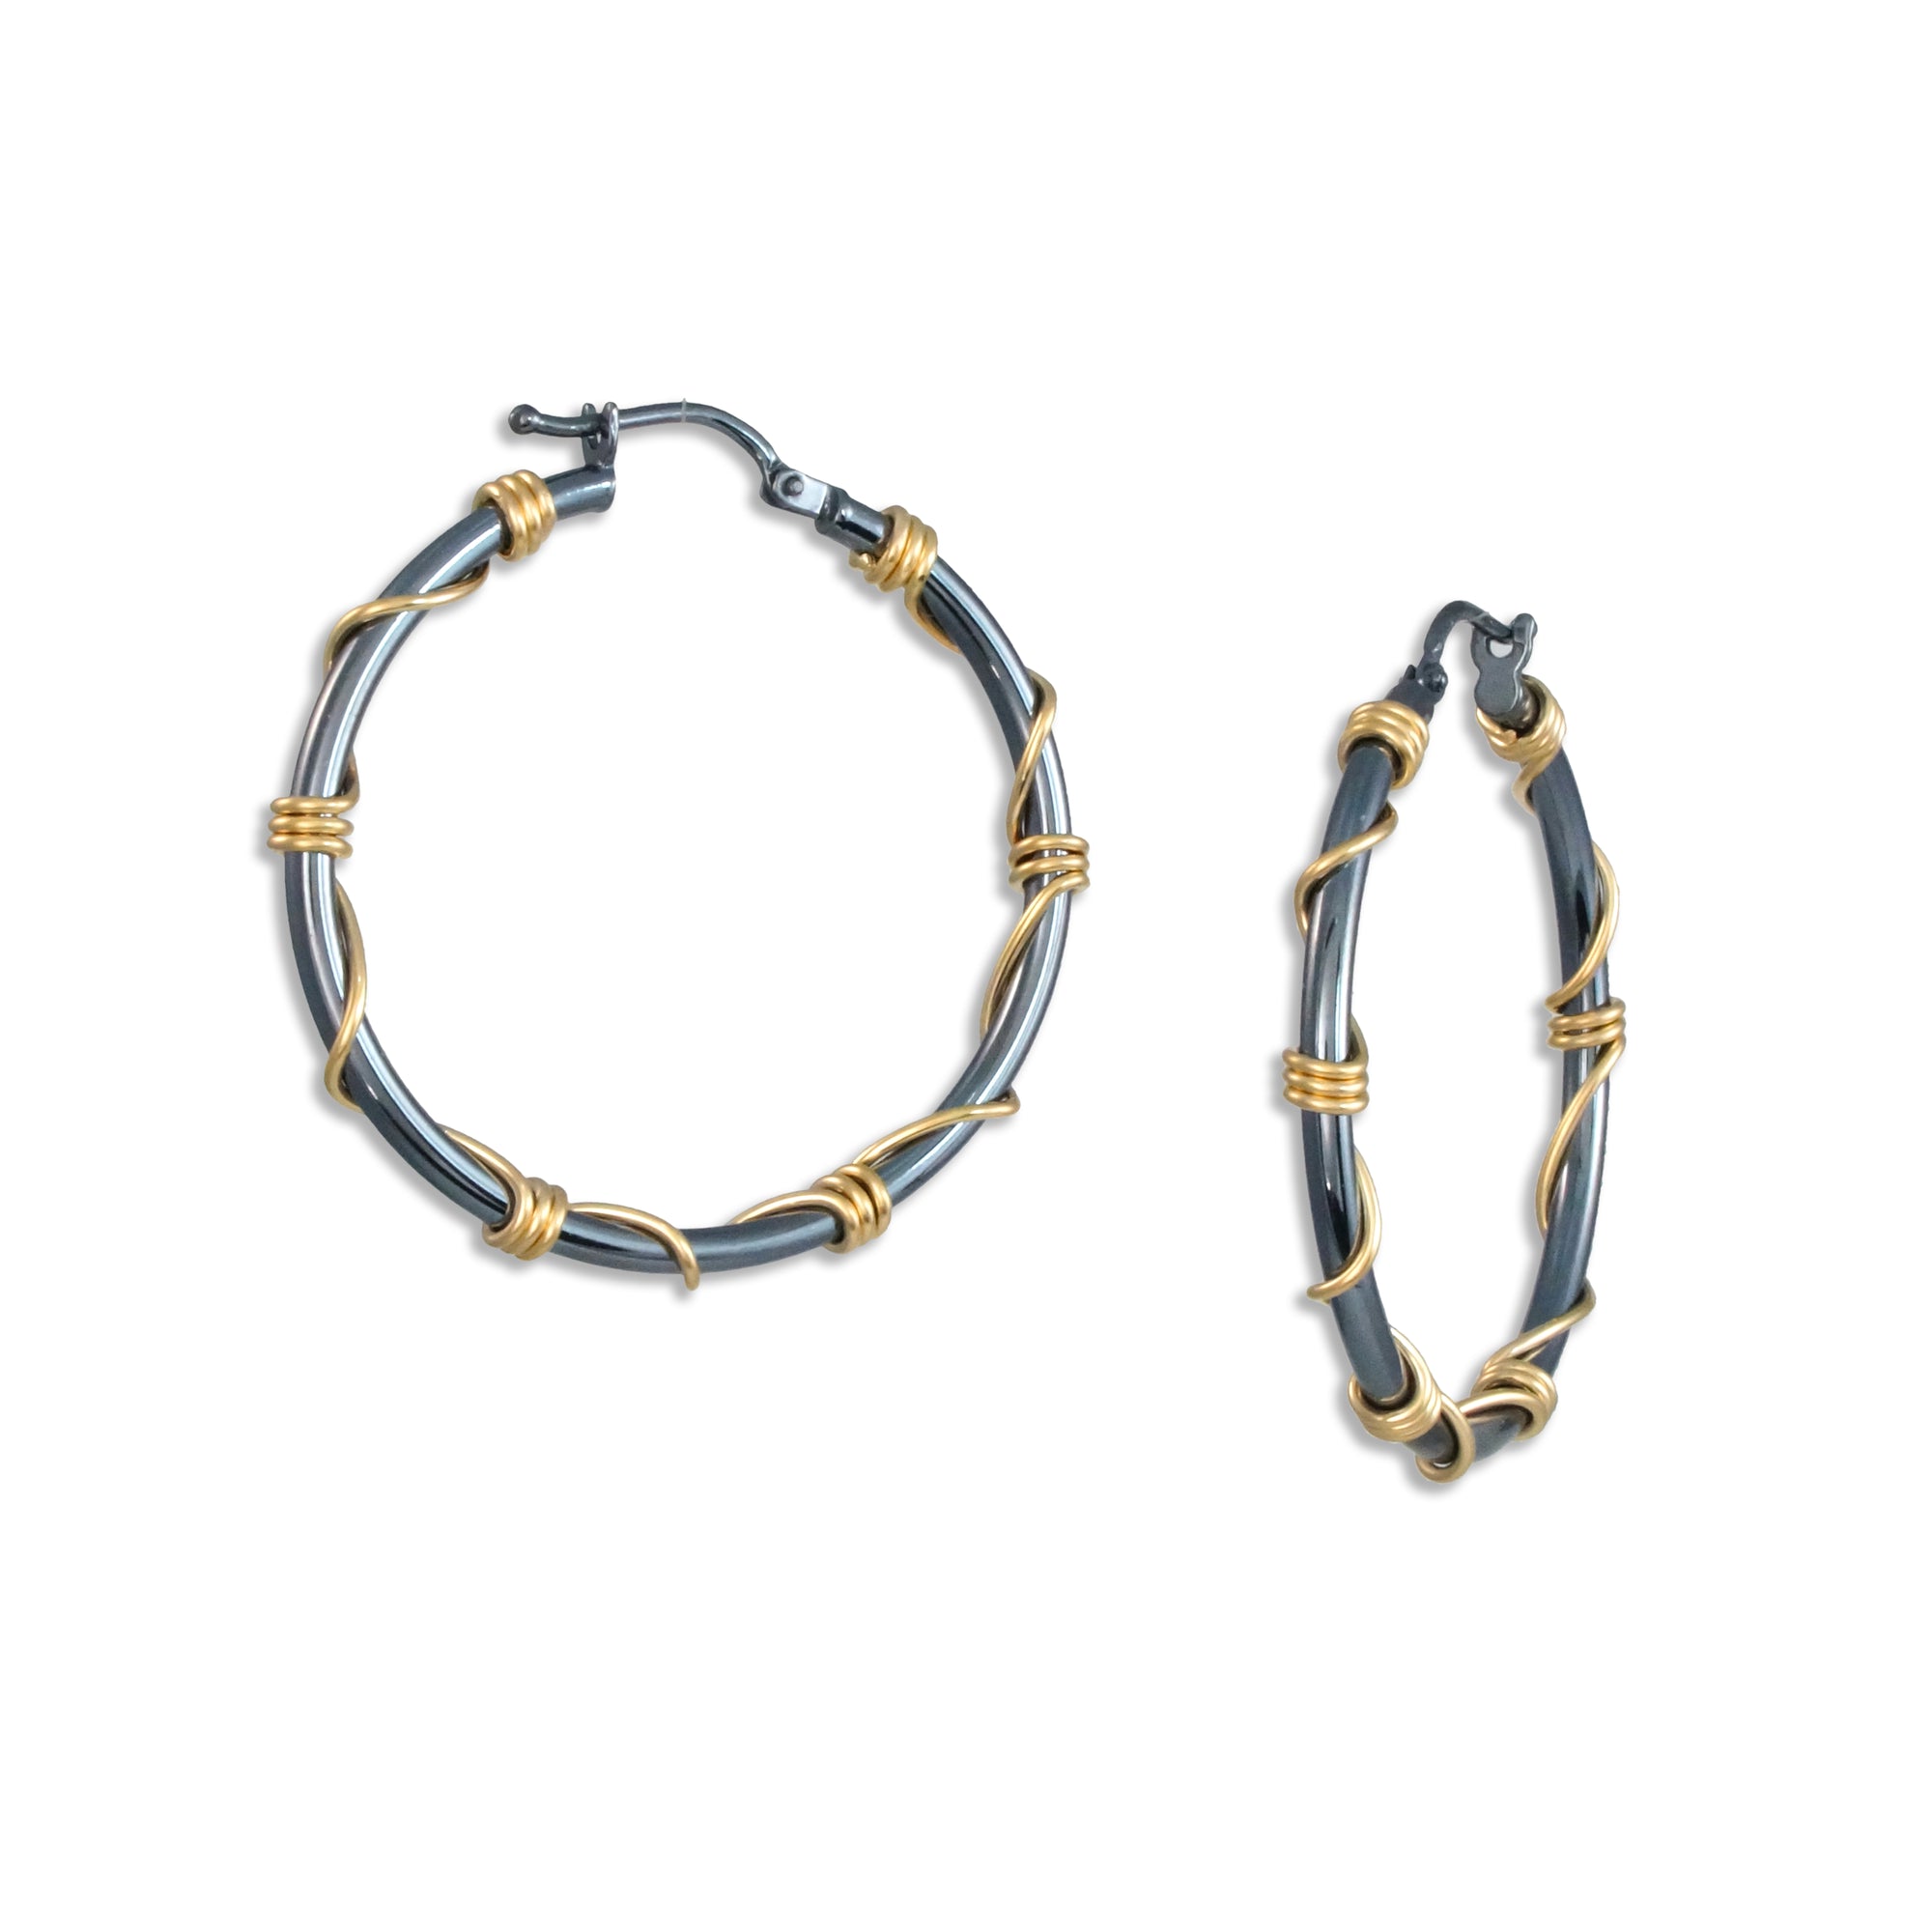 Unique Hoop Earrings - Black and Gold Wrapped